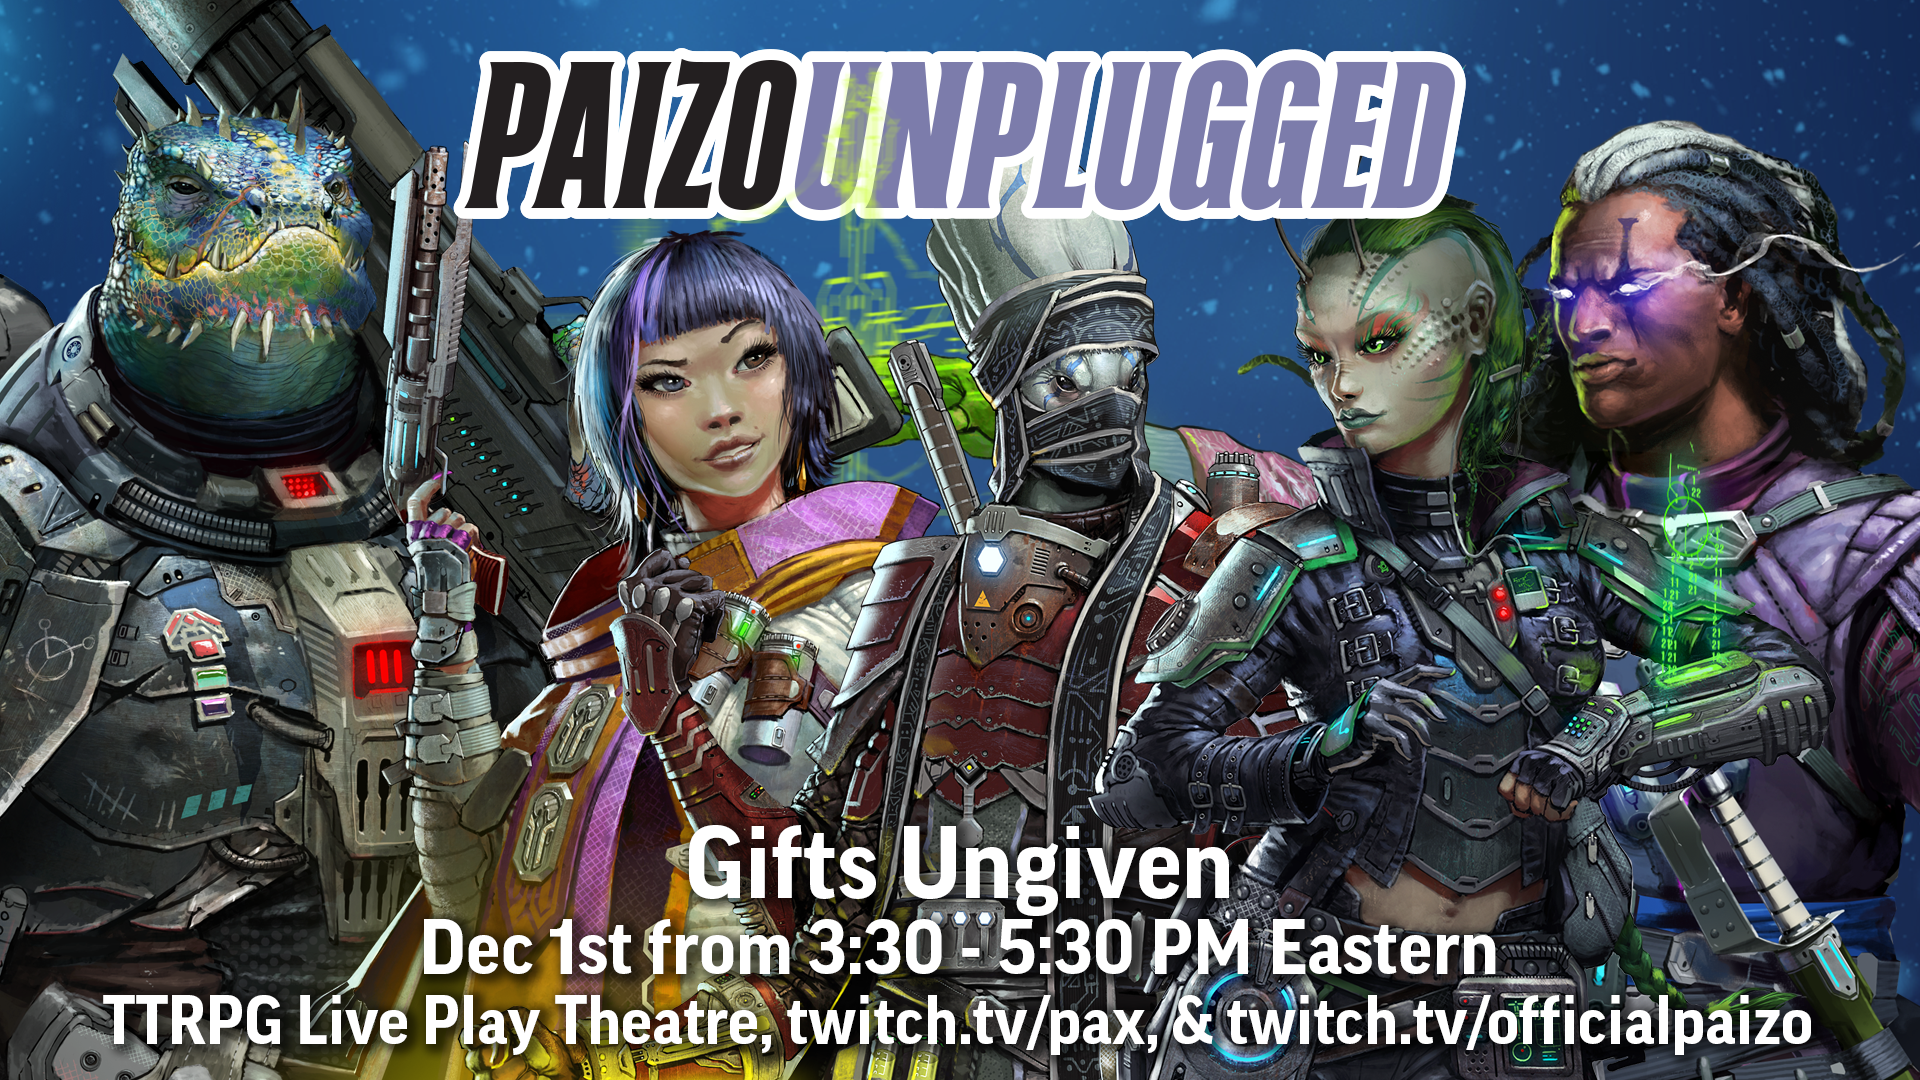 Pax Unplugged: Gifts Ungiven Dec 1st from 3:30 to 5:30 PM Eastern - TTRPG Live Play Theater, twitch.tv/pax & twitch.tv/officialpaizo